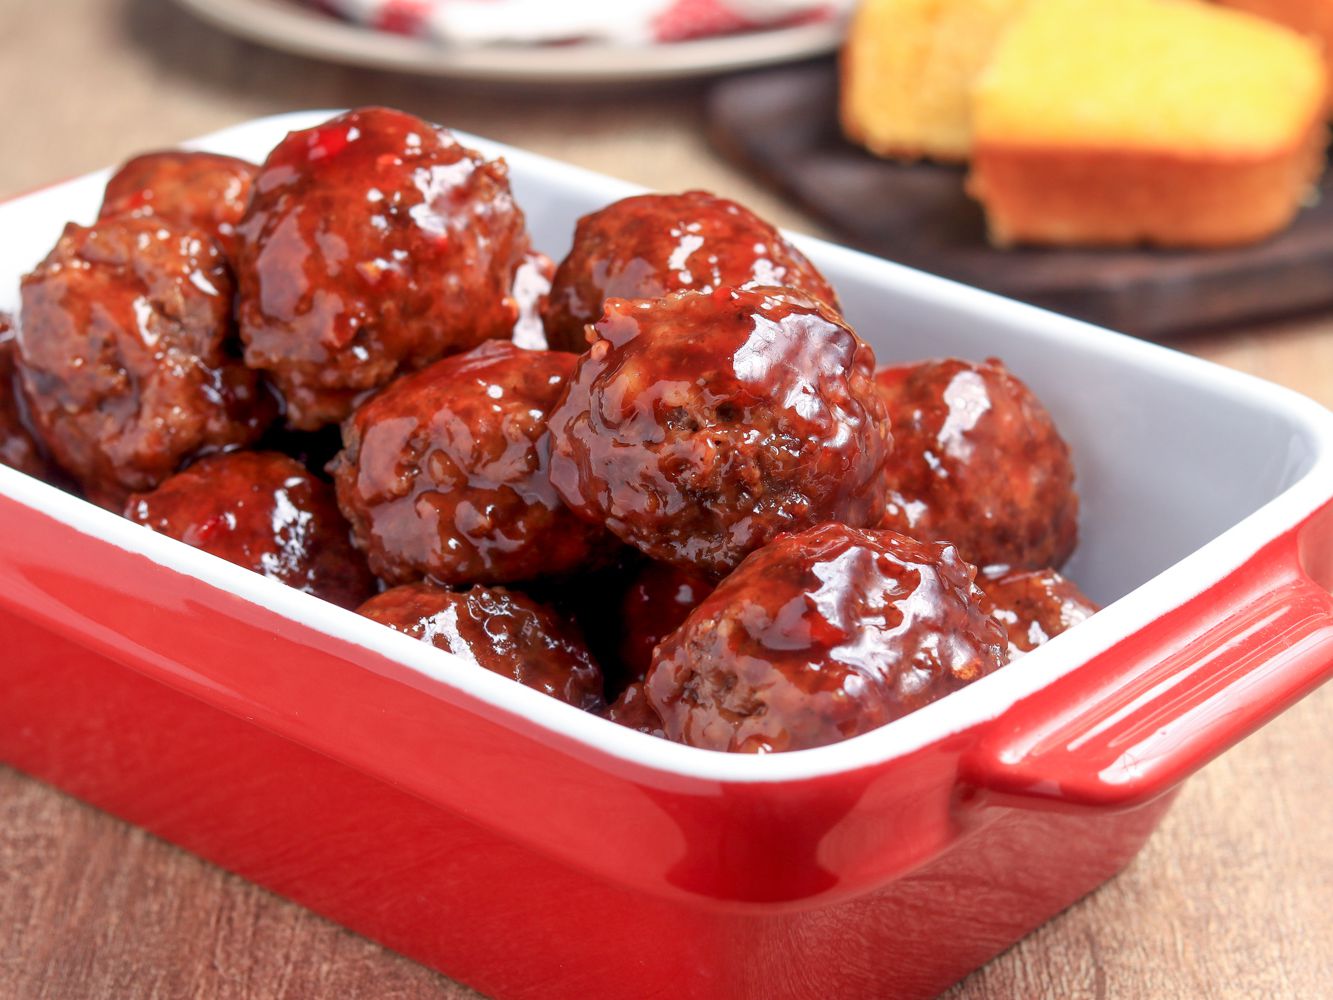 Are You American, Australian, British, Or Canadian When It Comes to Eating? Grape jelly meatballs